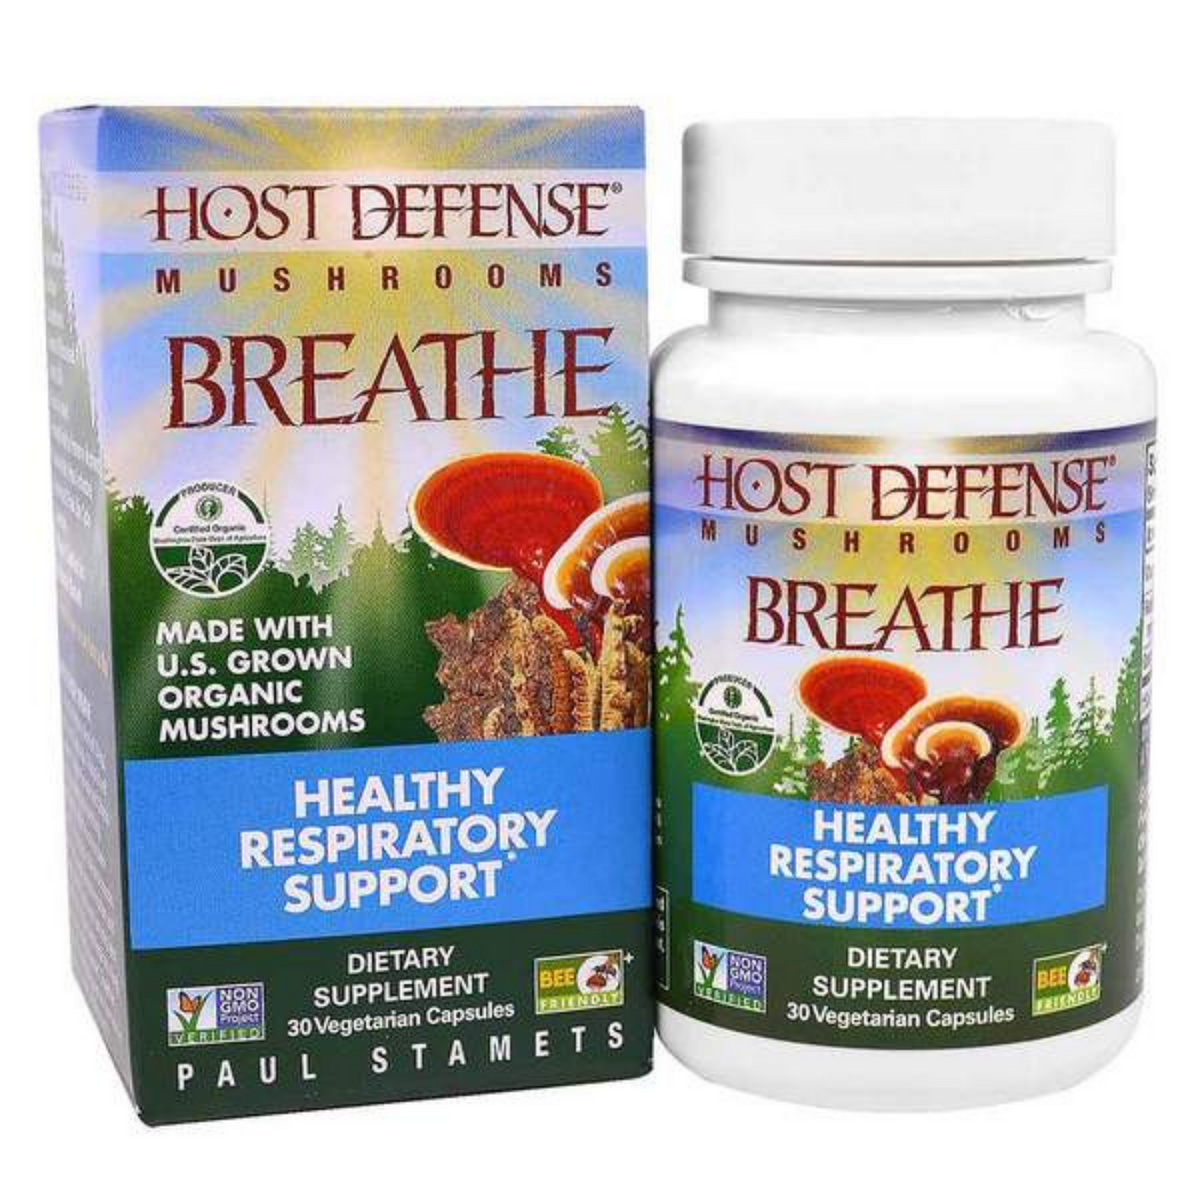 Primary image of Breathe Healthy Respiratory Support Capsules